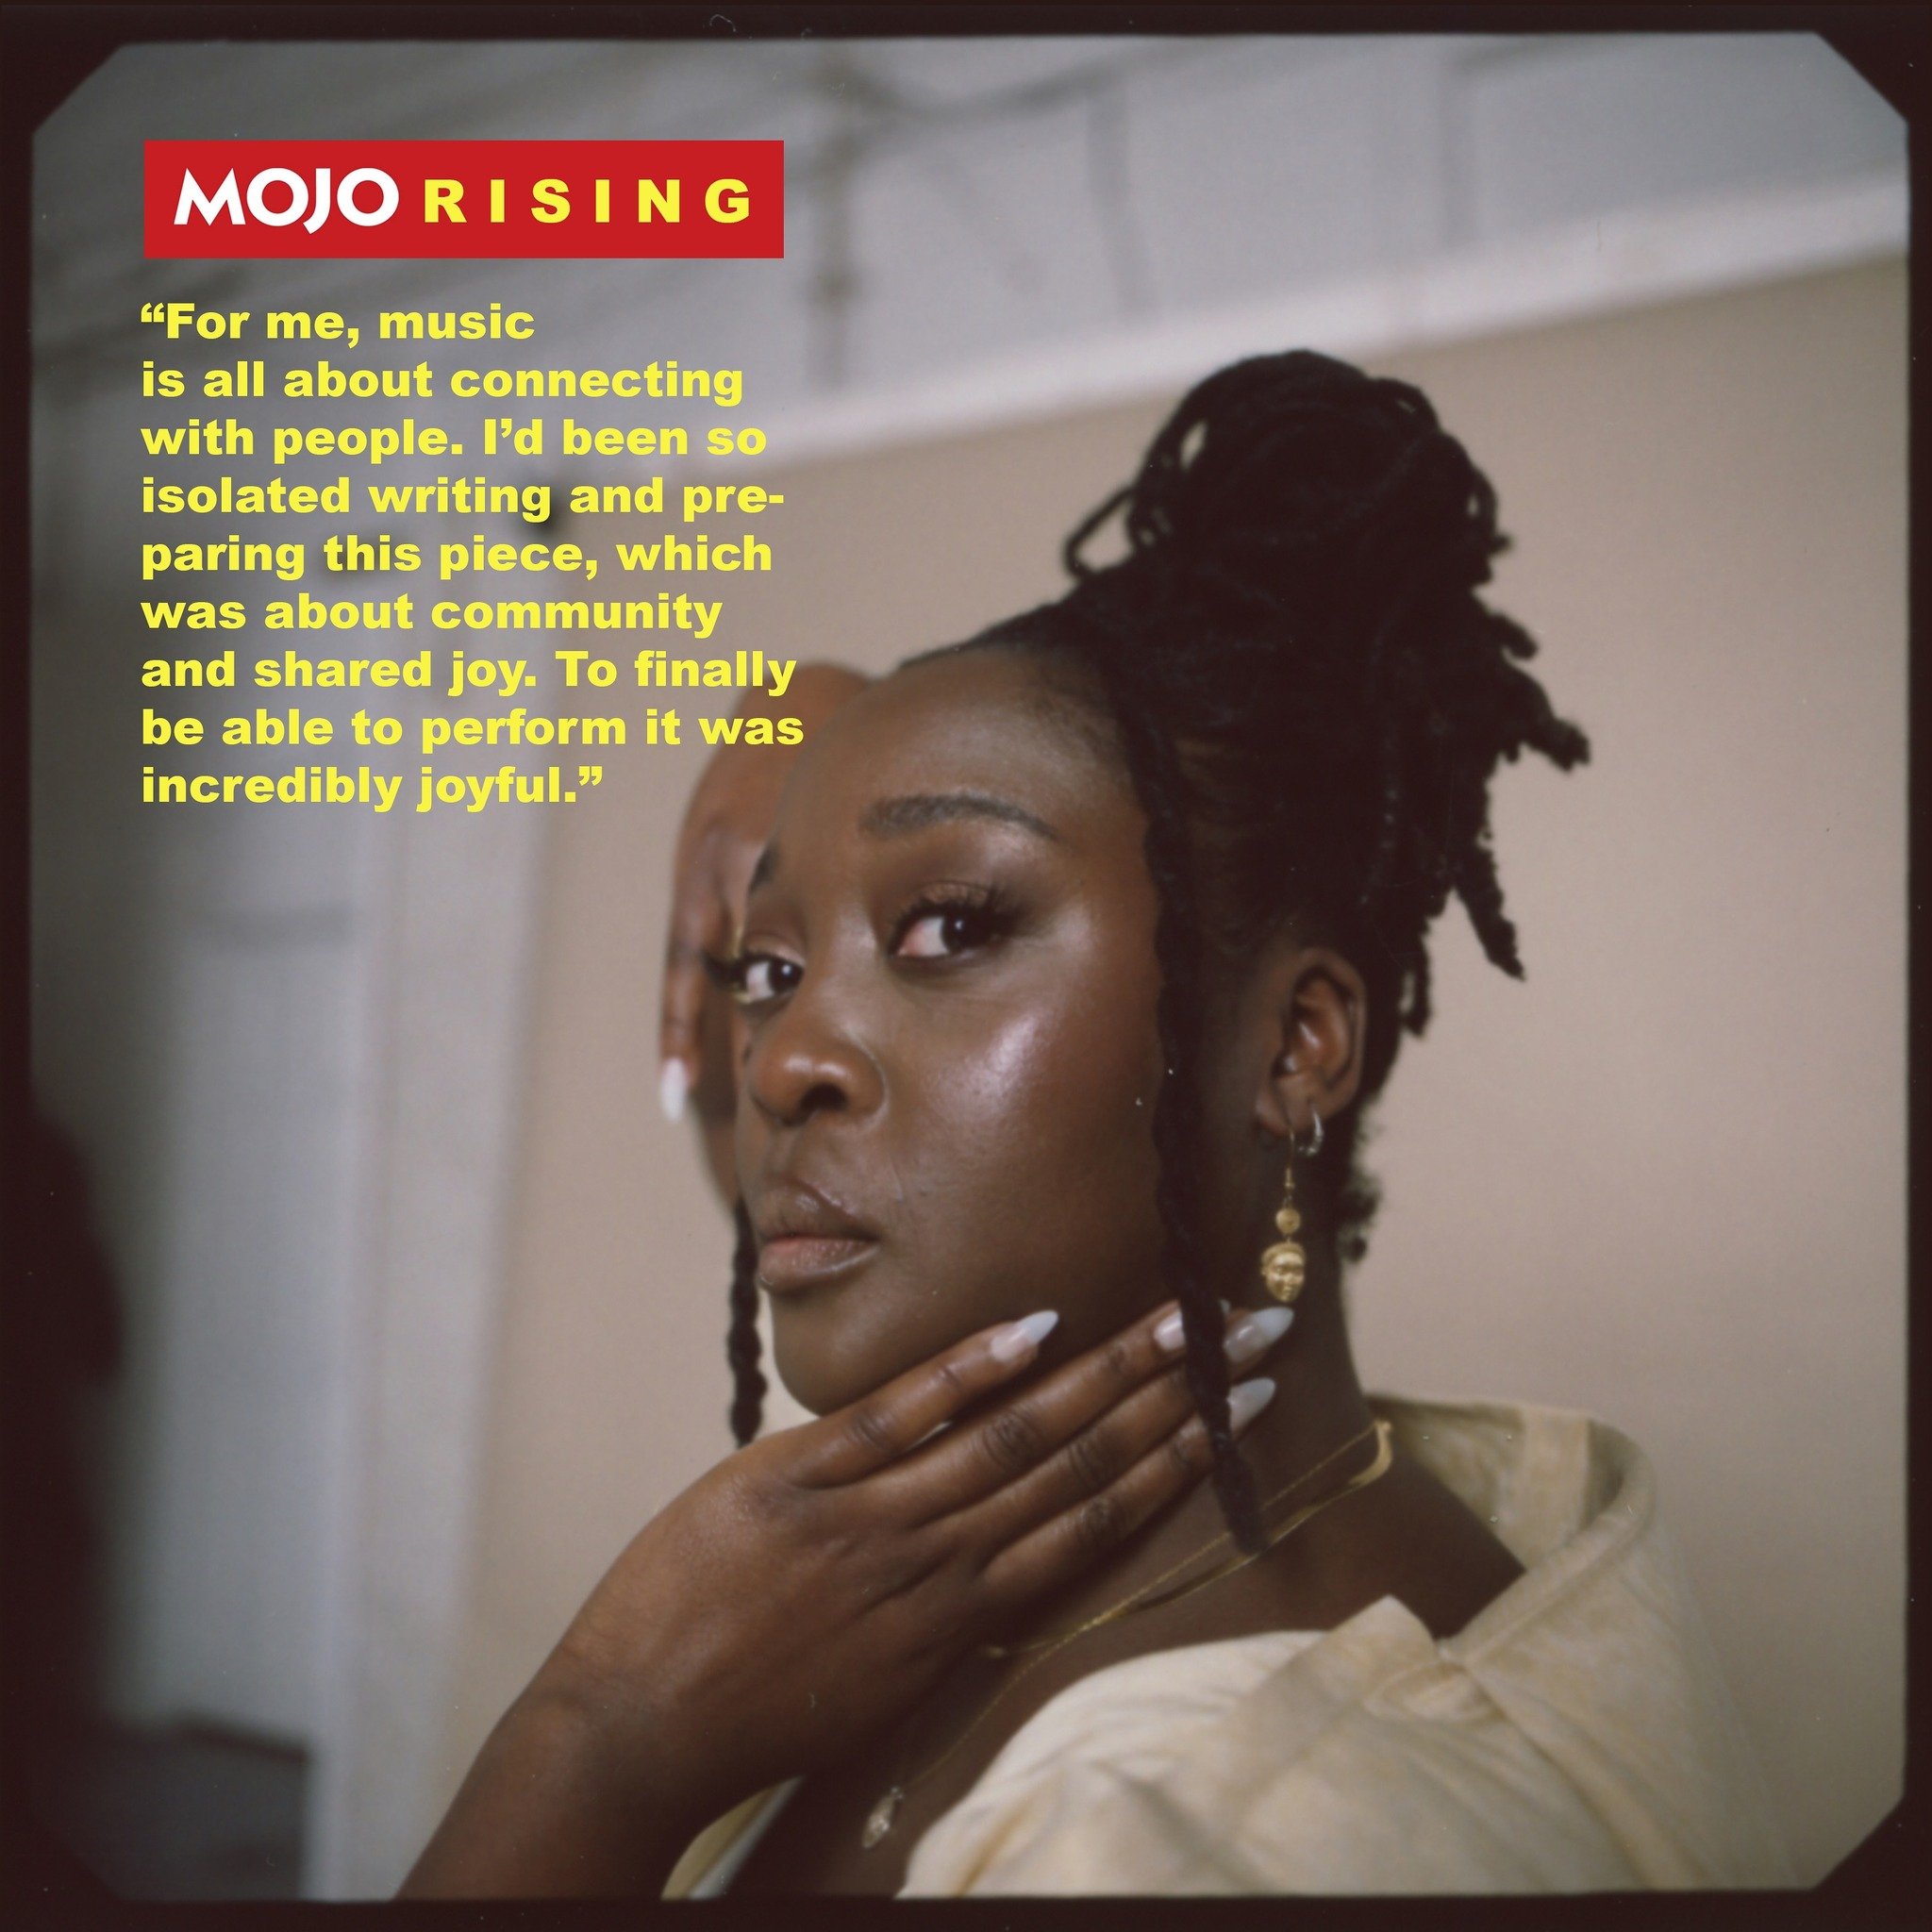 For their latest 𝗠𝗢𝗝𝗢 𝗥𝗜𝗦𝗜𝗡𝗚 feature, @mojo4music takes a close look at @cassiekinoshi and talks to her about music and the making of her newest album, 𝘨𝘳𝘢𝘵𝘪𝘵𝘶𝘥𝘦.

&ldquo;For me, music
is all about connecting
with people. I&rsquo;d